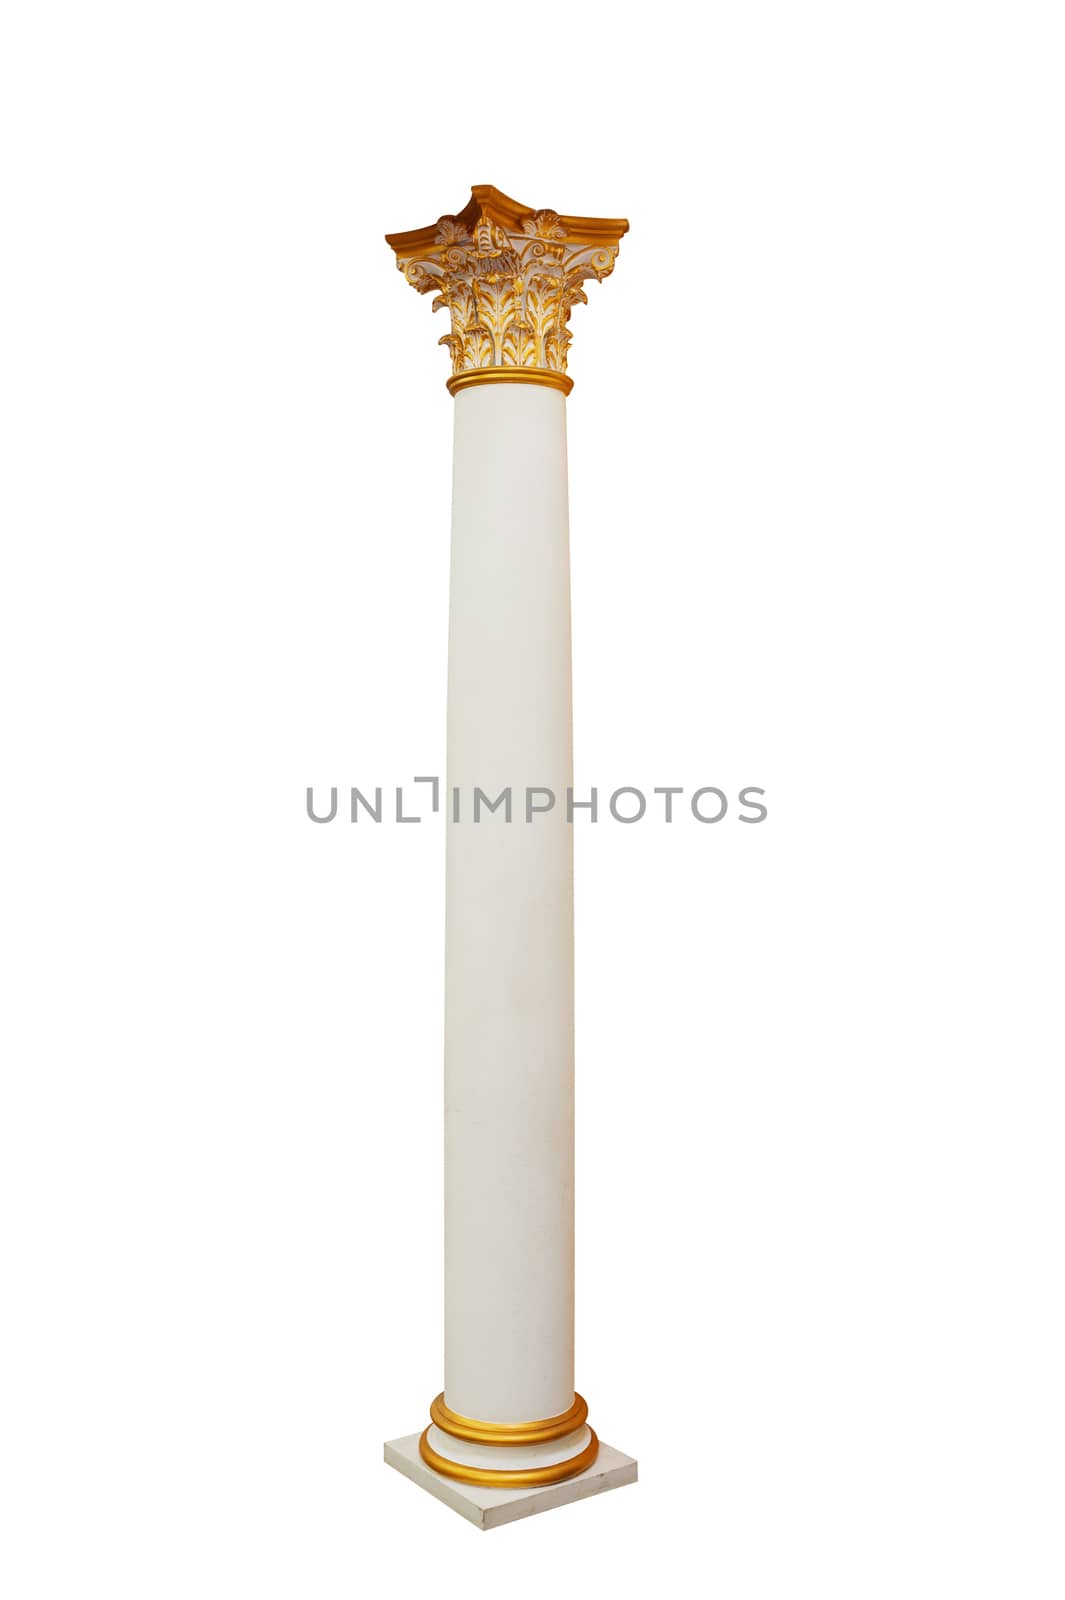 column in classical architectural style isolated on white background.